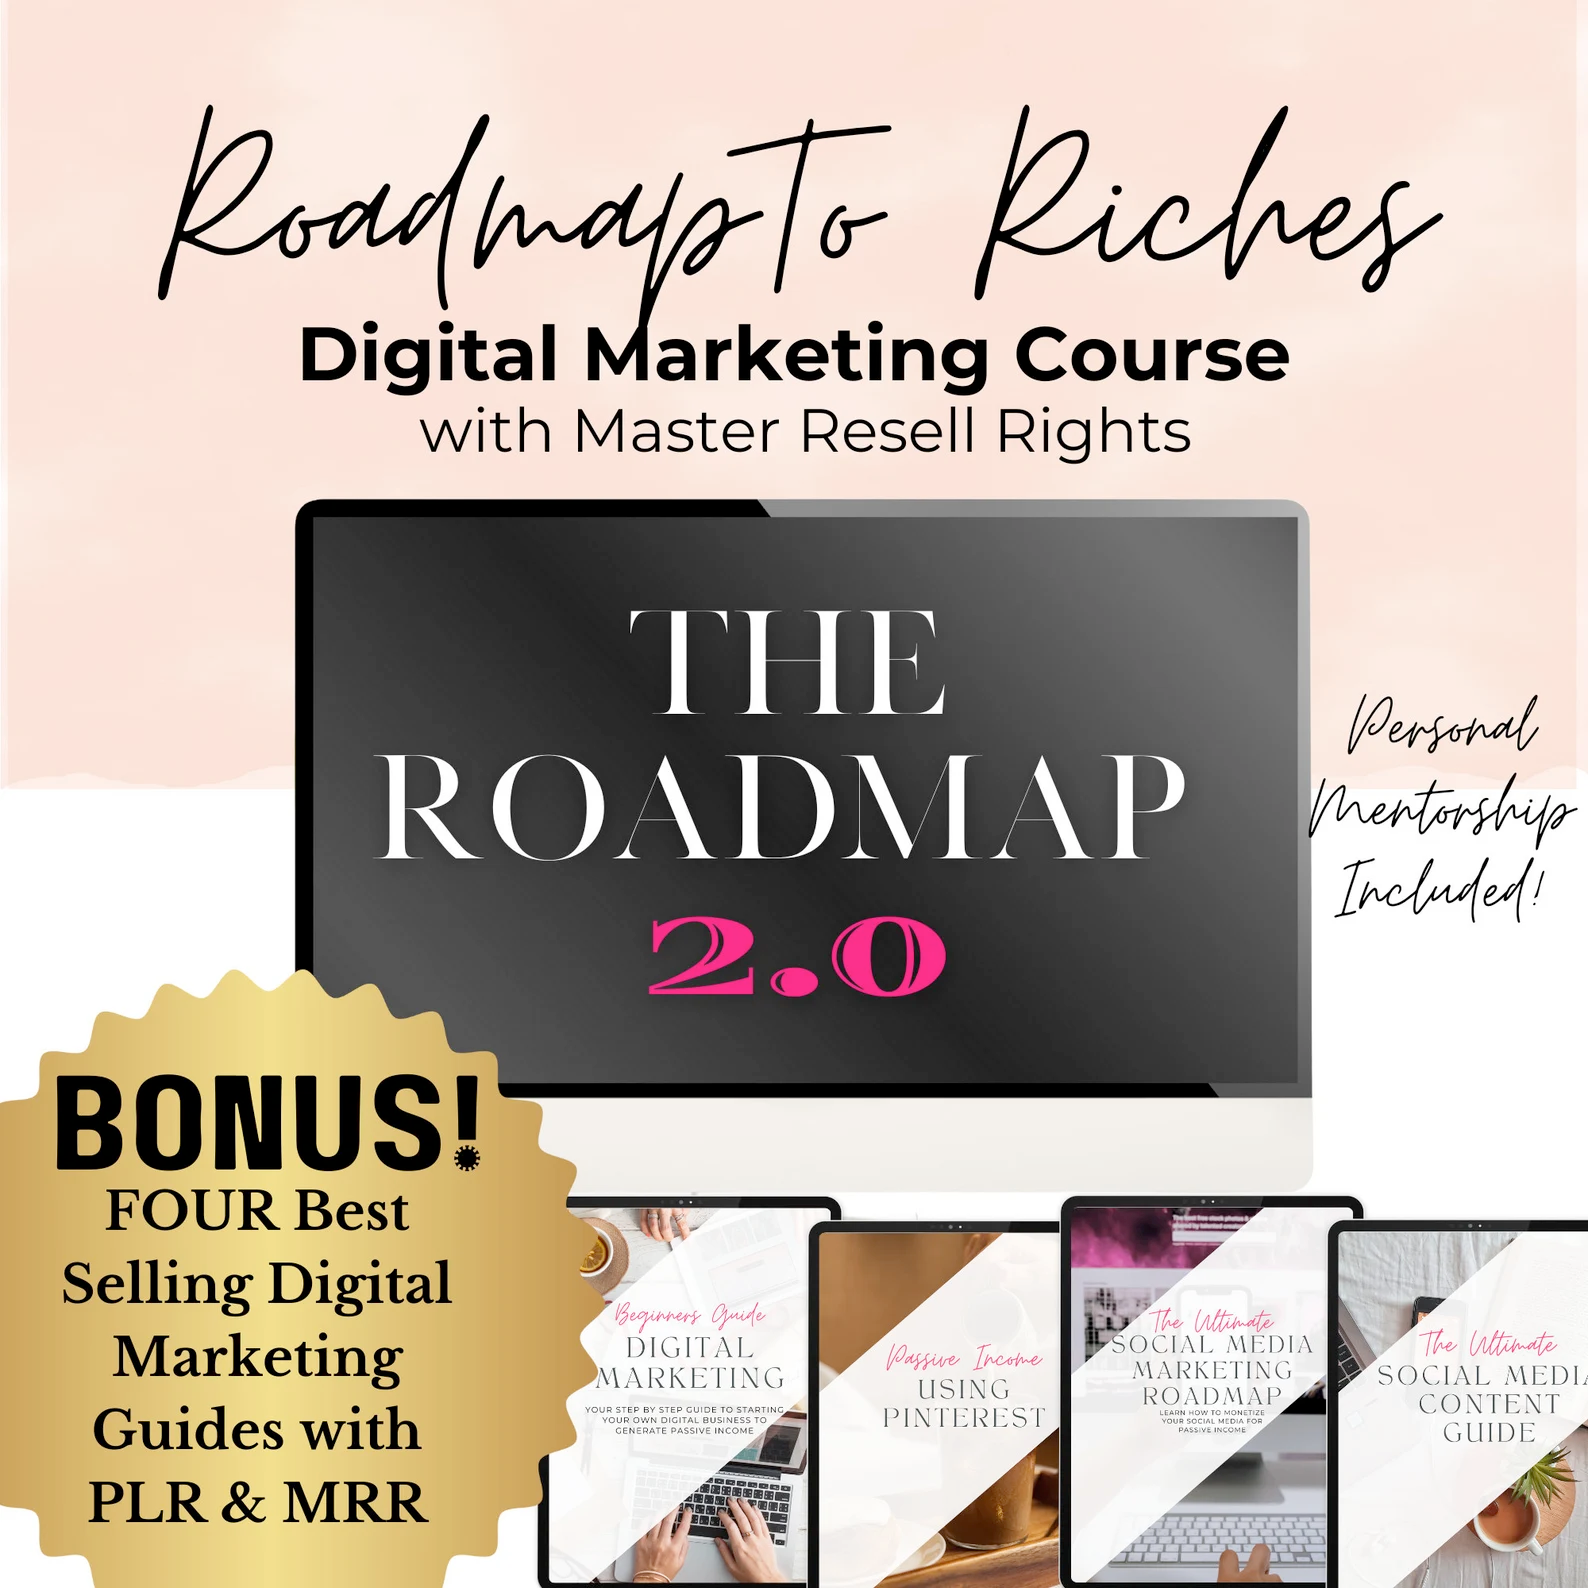 Roadmap To Riches 2.0 Course Master Resell Rights Digital Marketing Business Development Digital Marketing Blueprints Course PLR Course